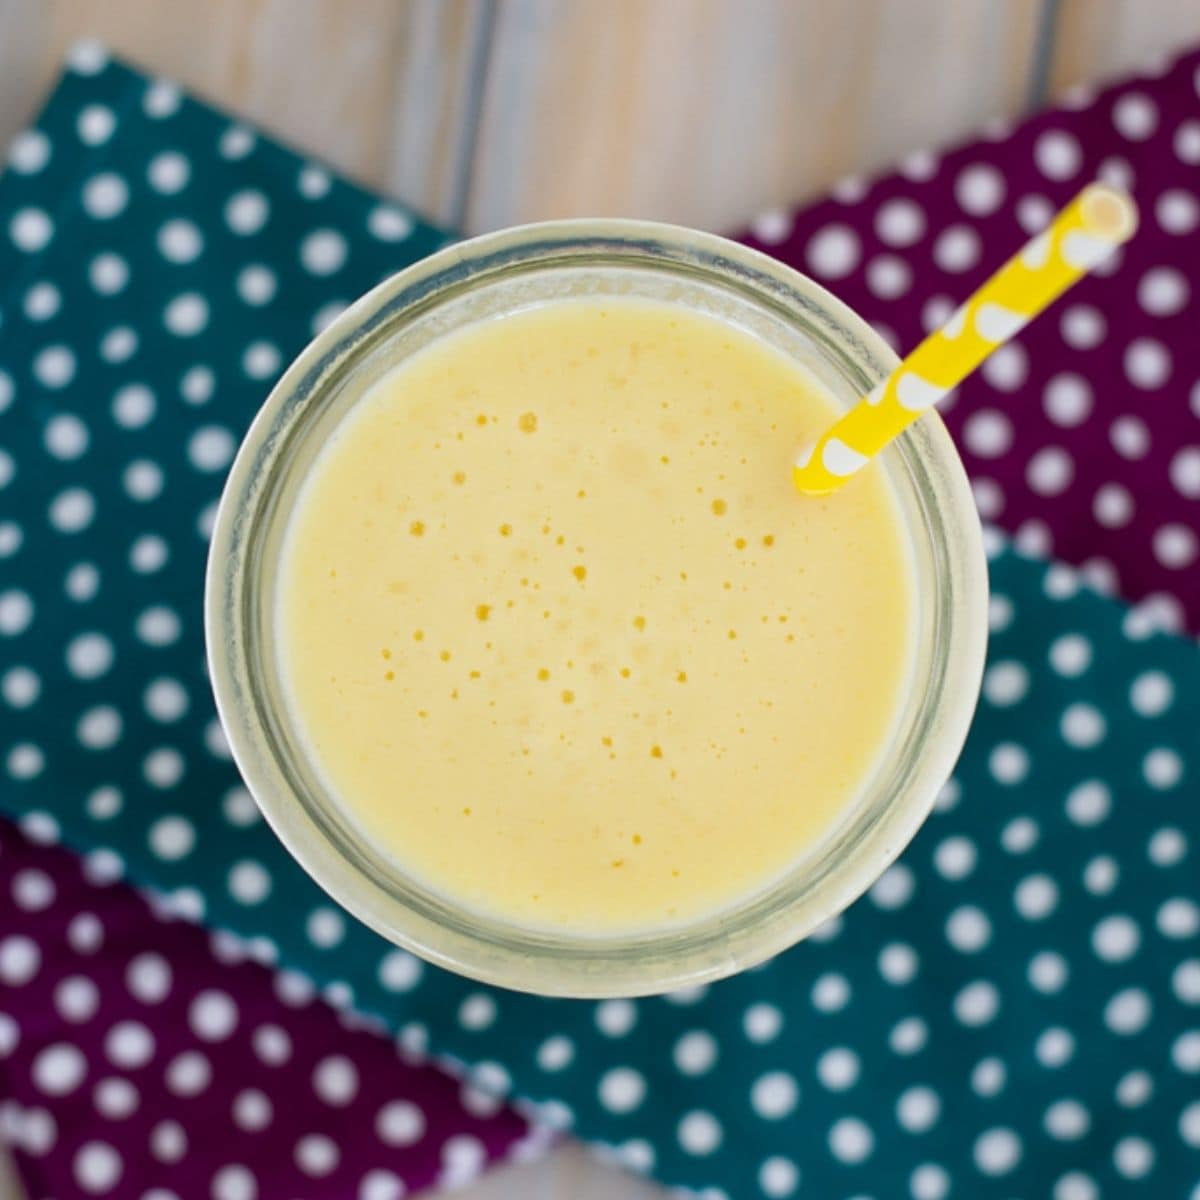 Overhead image of a glass filled with Pineapple Mango Smoothie.